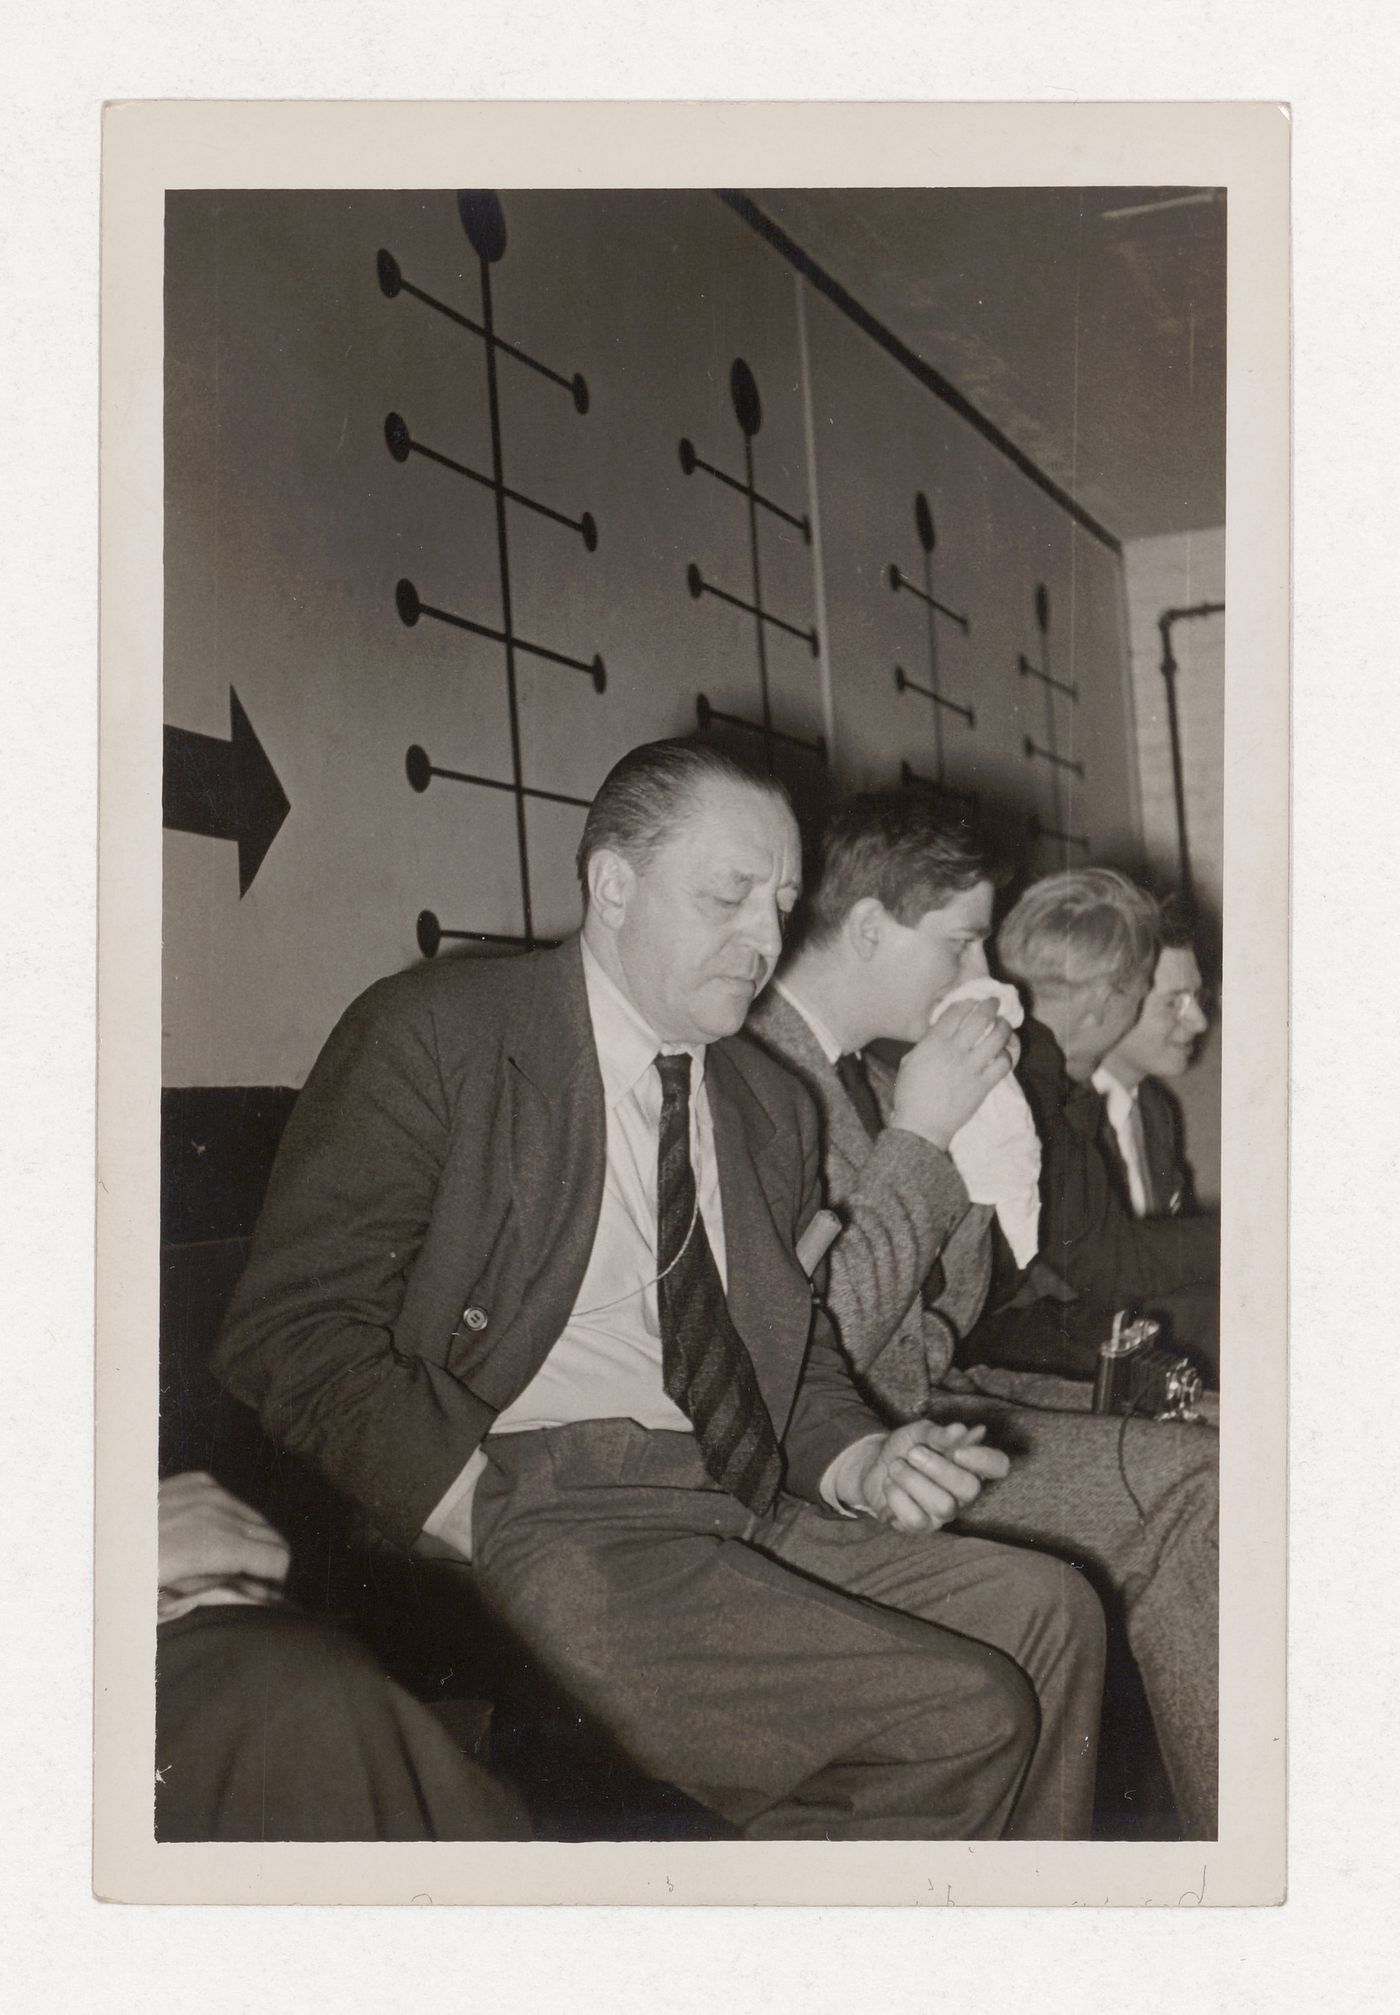 Mies van der Rohe, Thomas Burleigh, Donald Monson, and Earl Bluestein at the Art Institute of Chicago